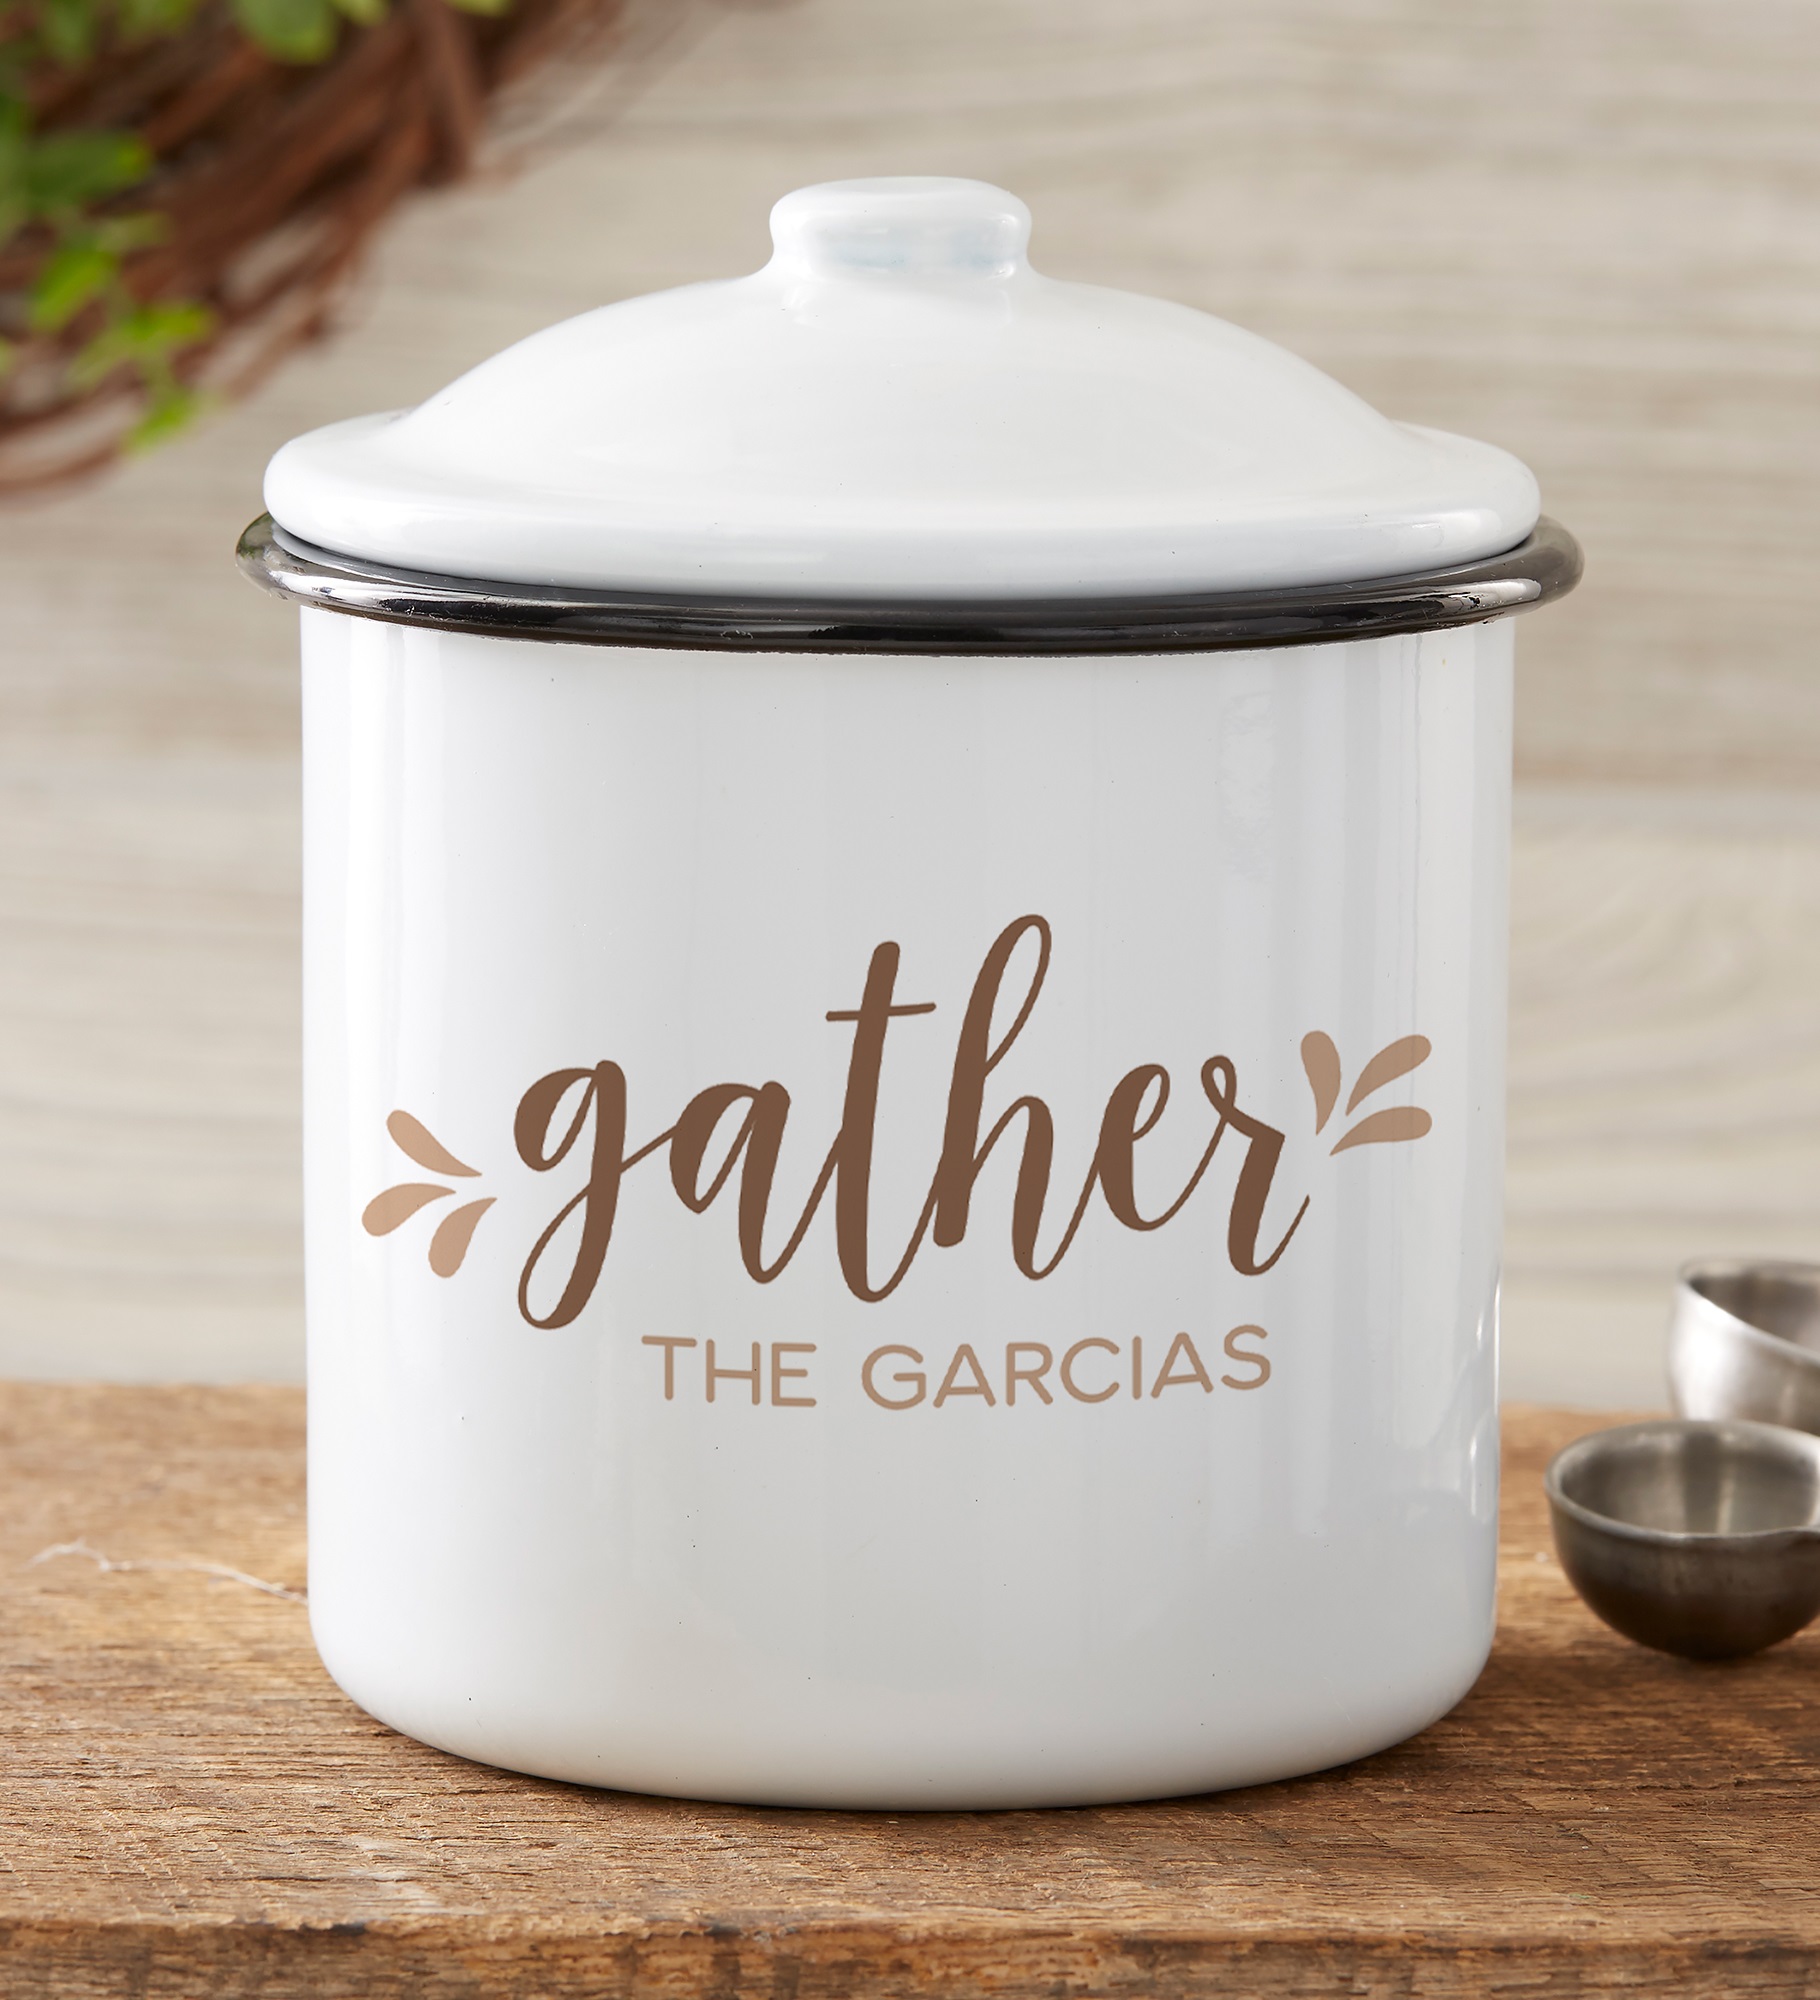 Gather & Gobble Personalized Enamel Canisters